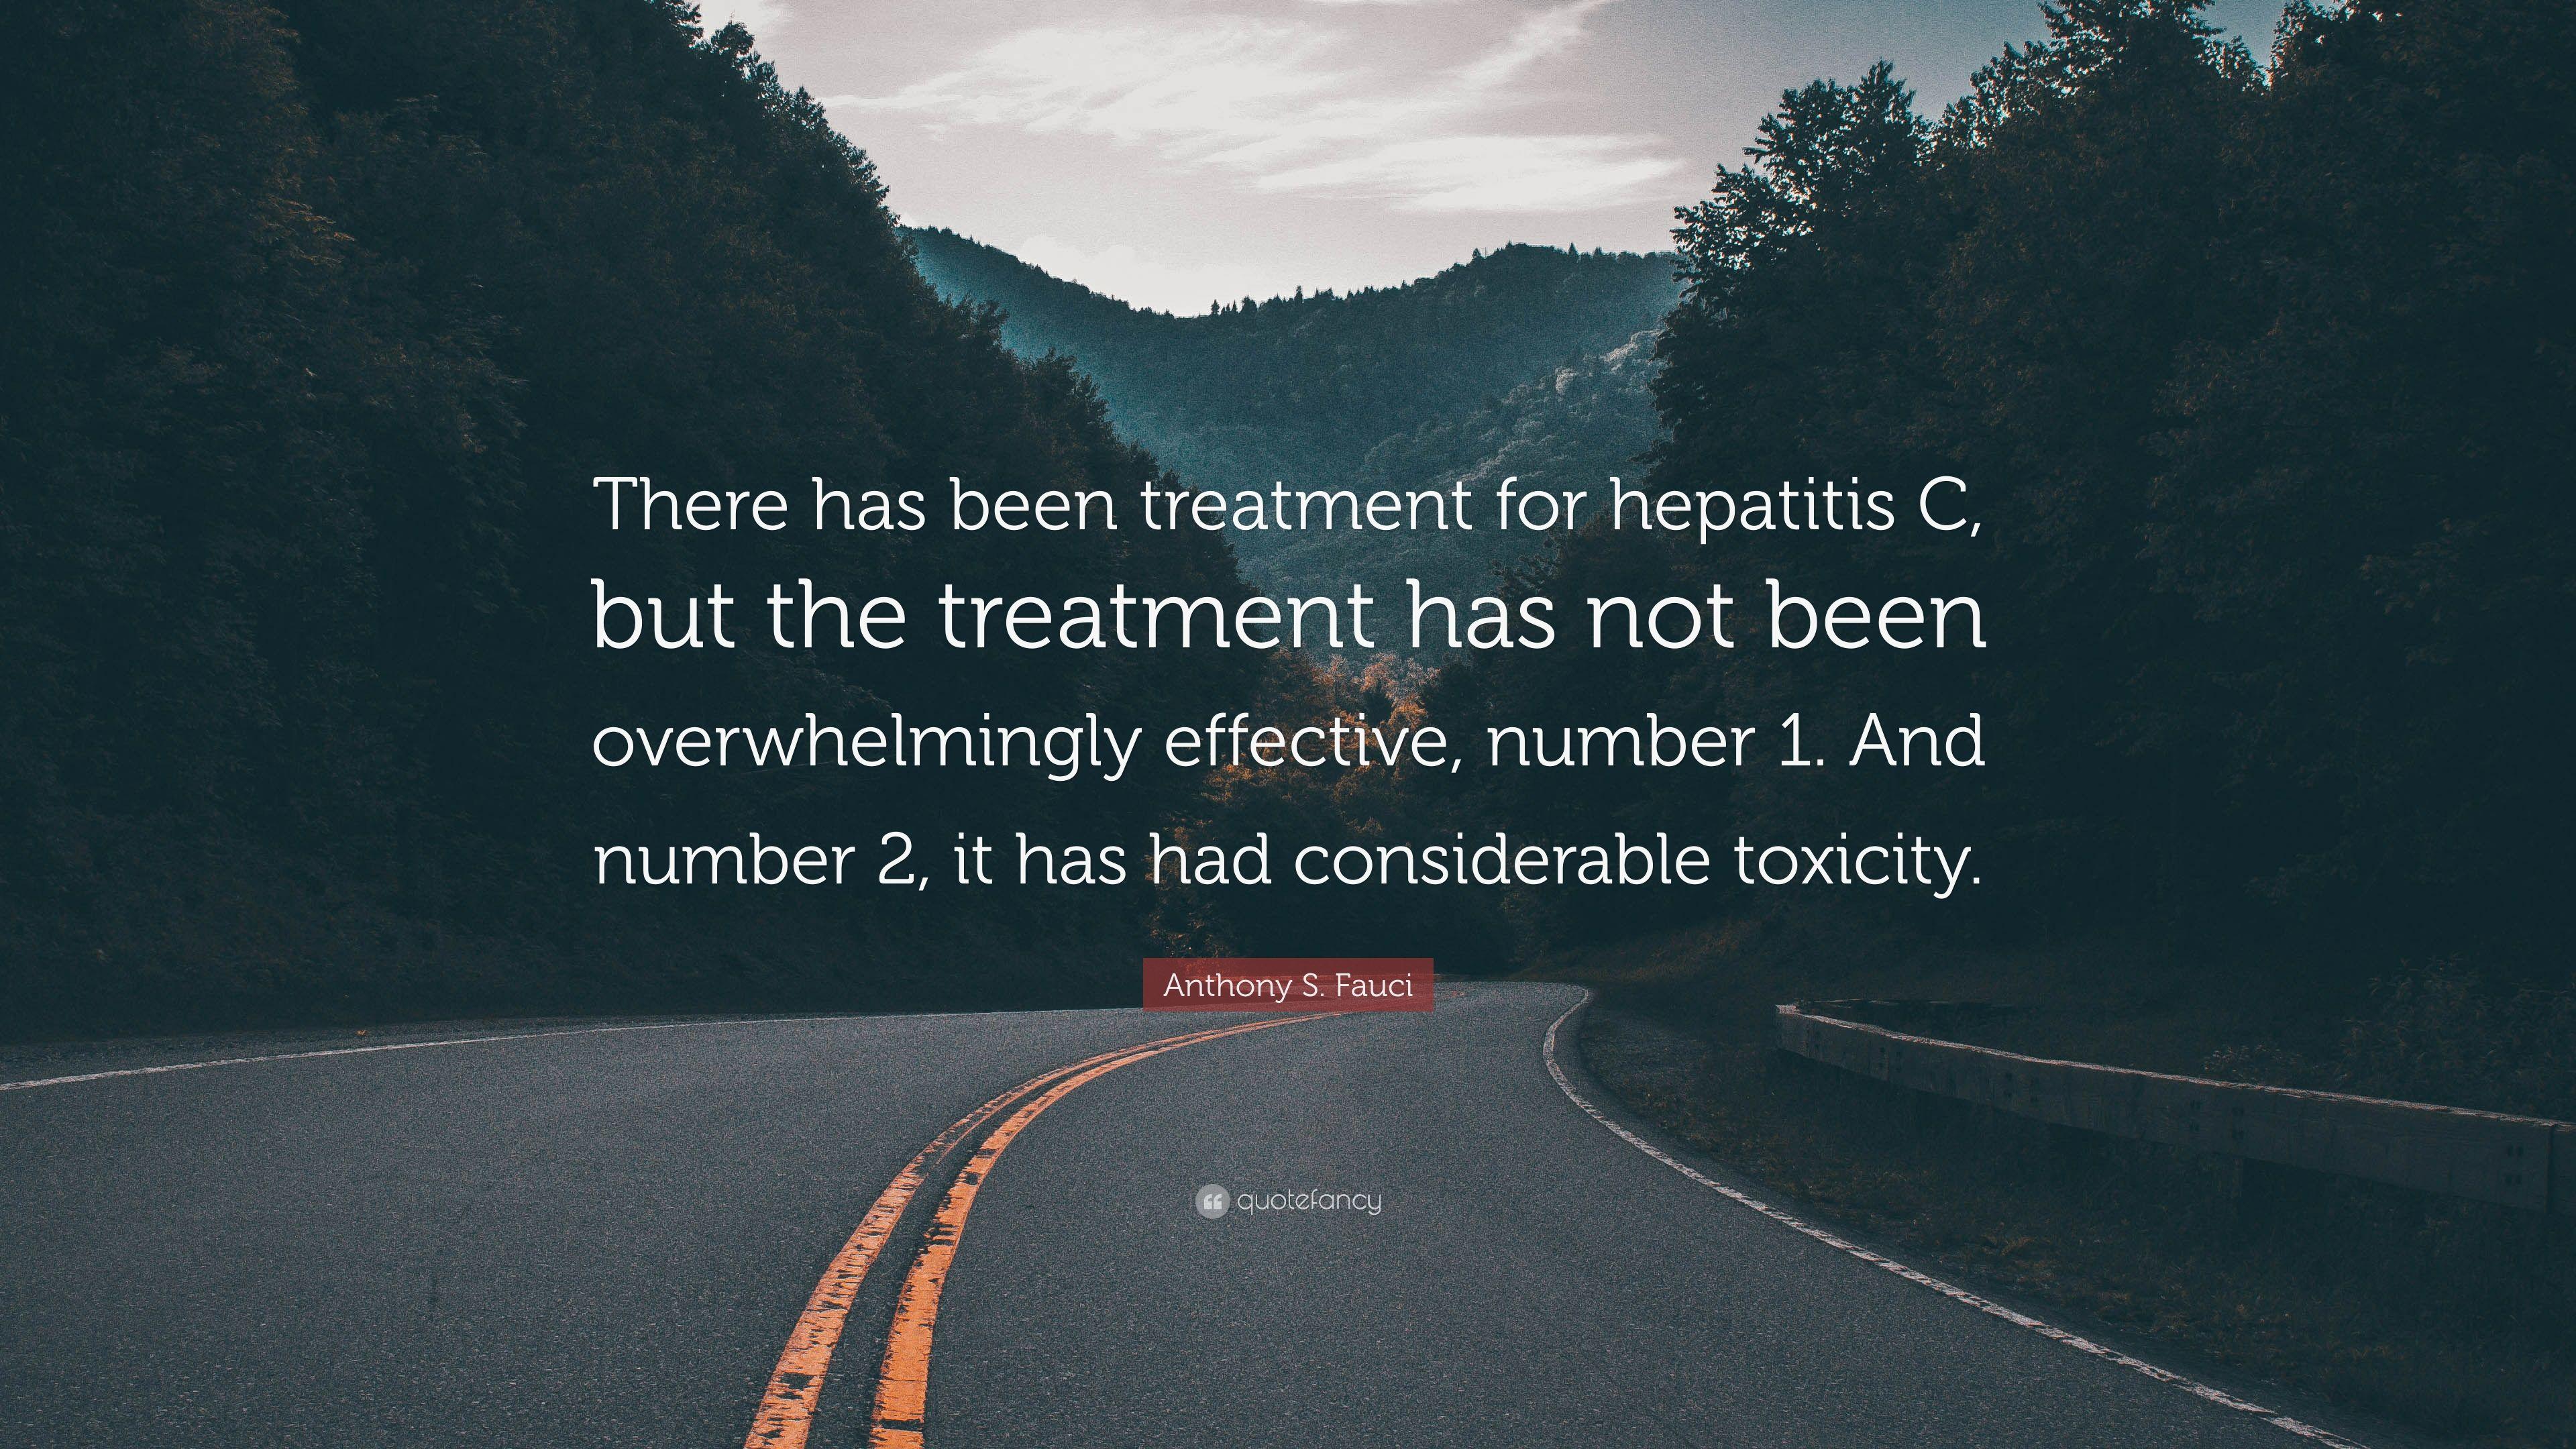 Anthony S. Fauci Quote: “There has been treatment for hepatitis C